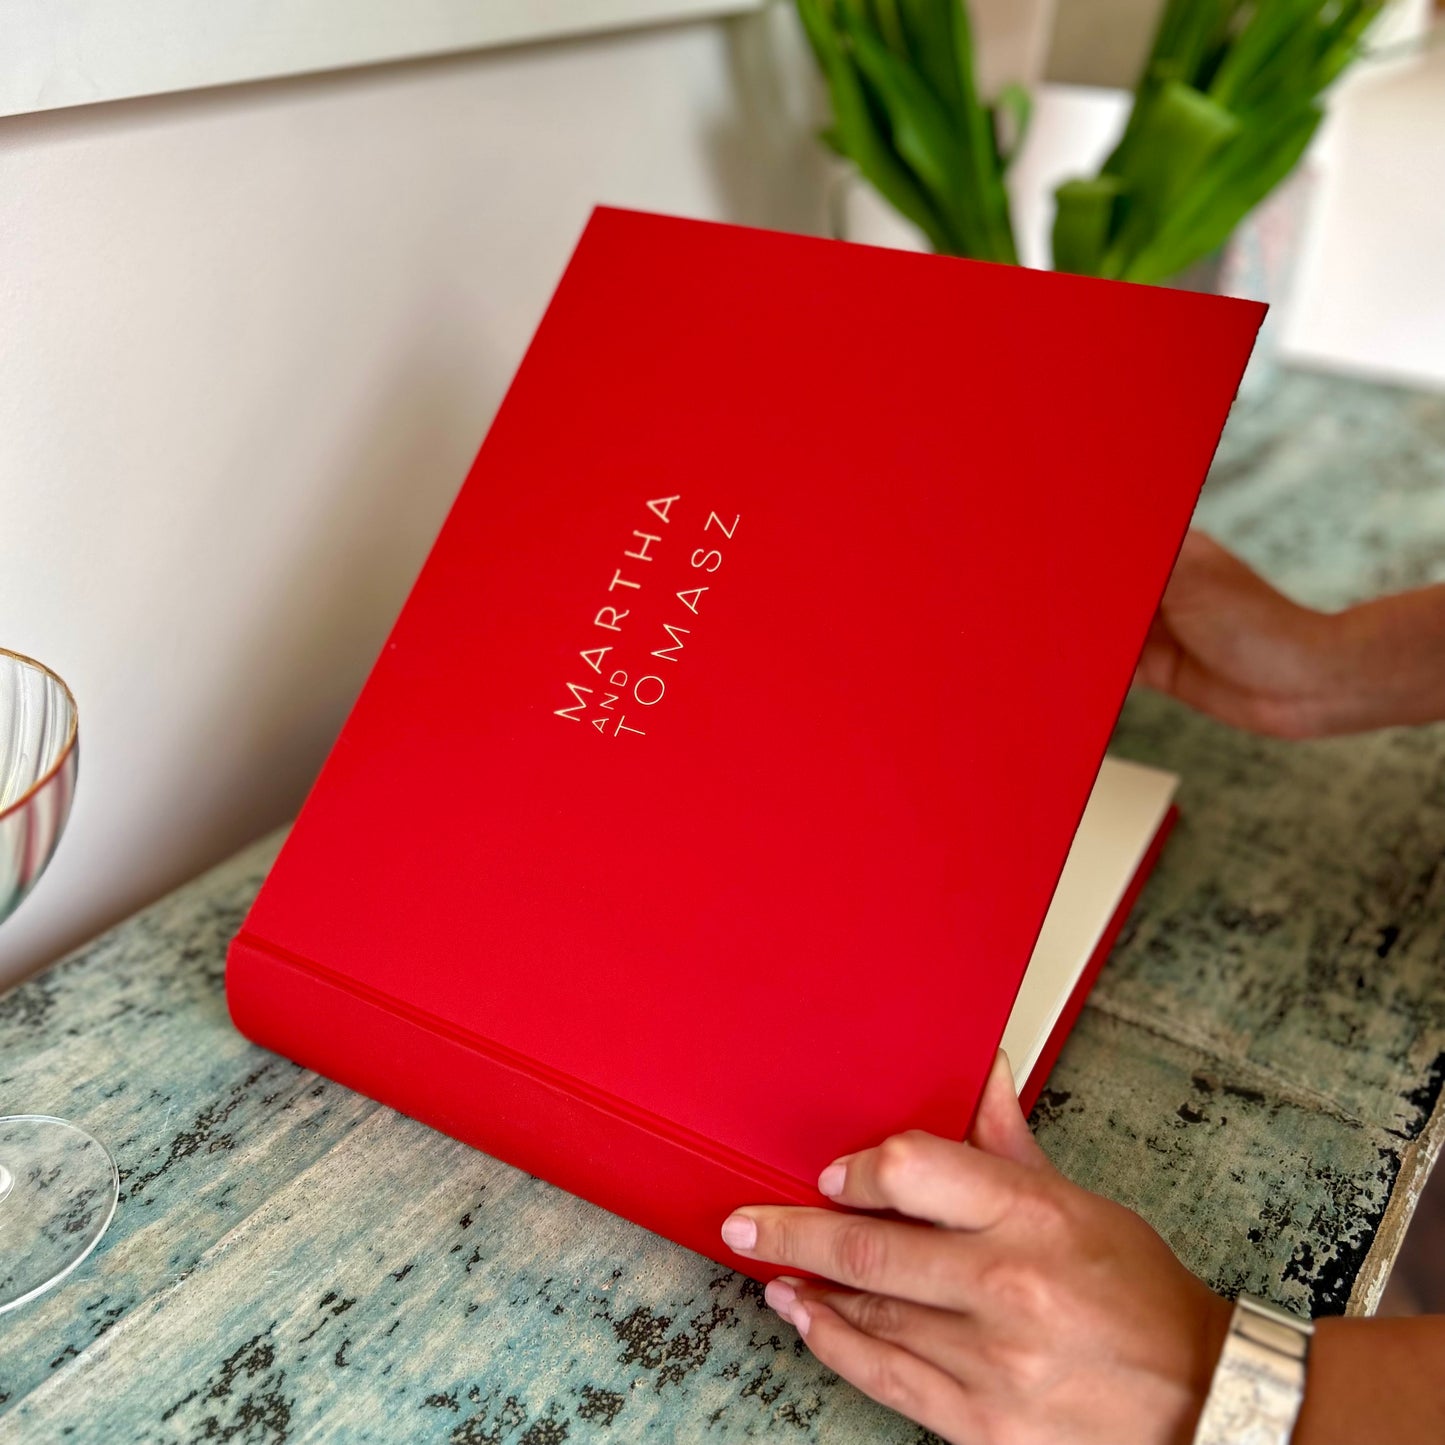 on a sideboard is a large red guest book with gold writing on the front. A woman is holding a pen about to write a message in it